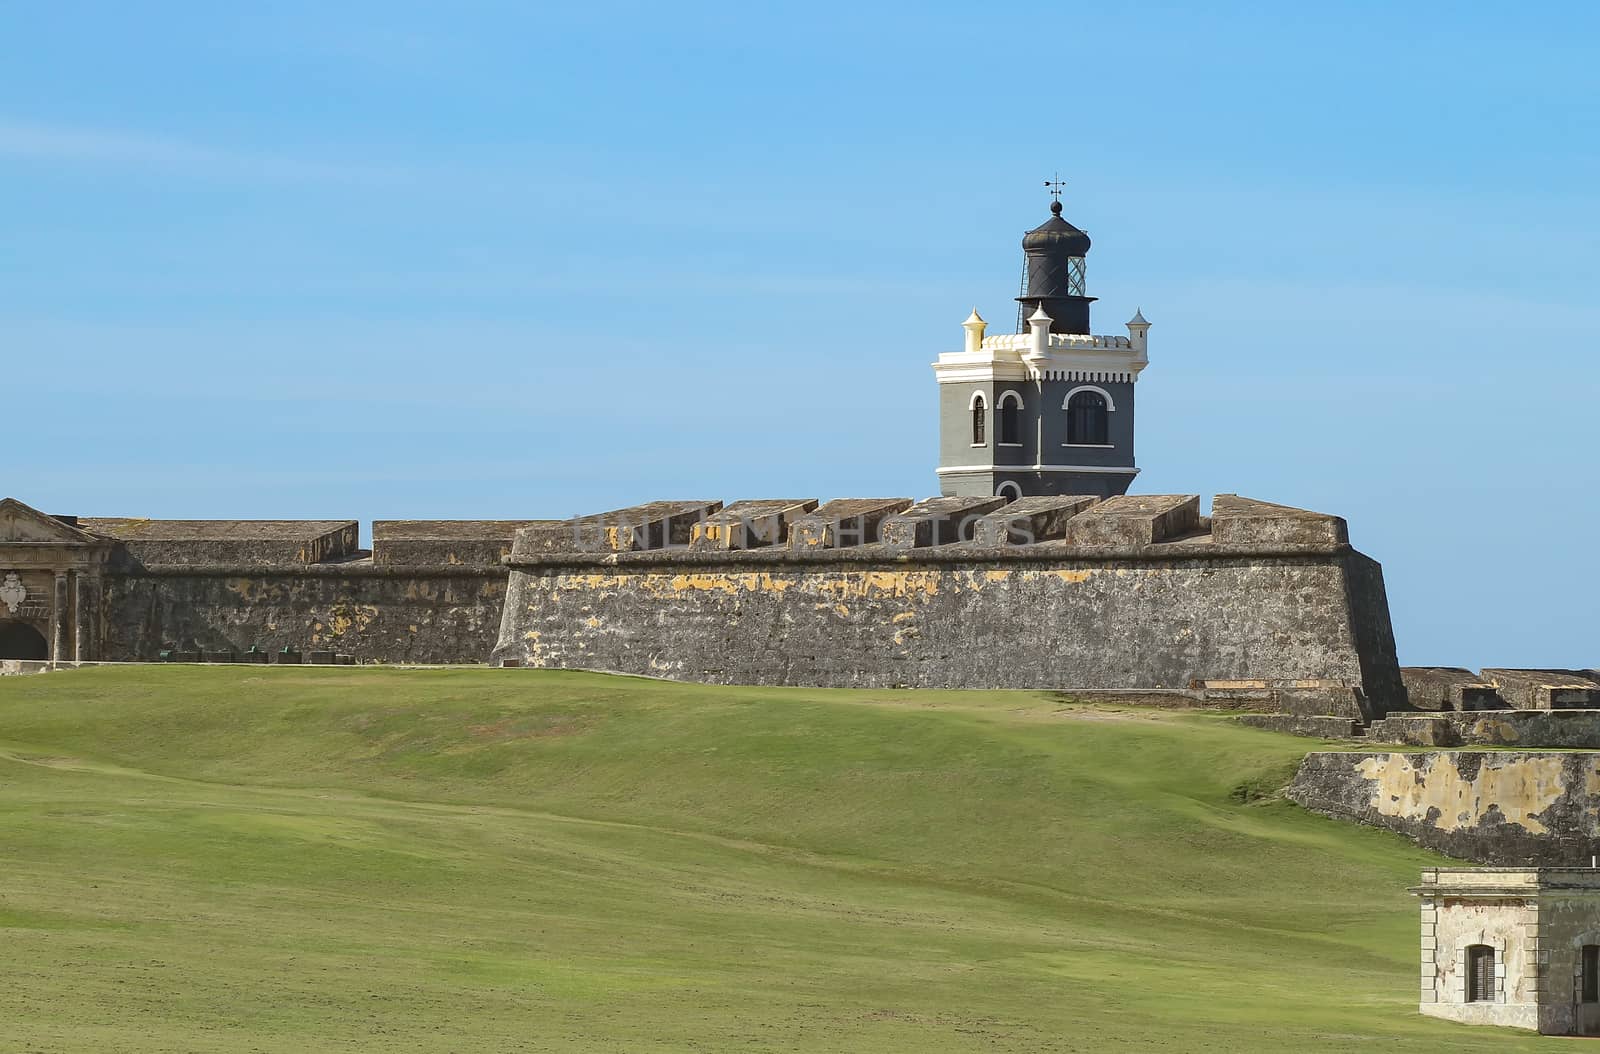 A view of the light tower at the Castillo San Felipe del Morro during the day. No people around.